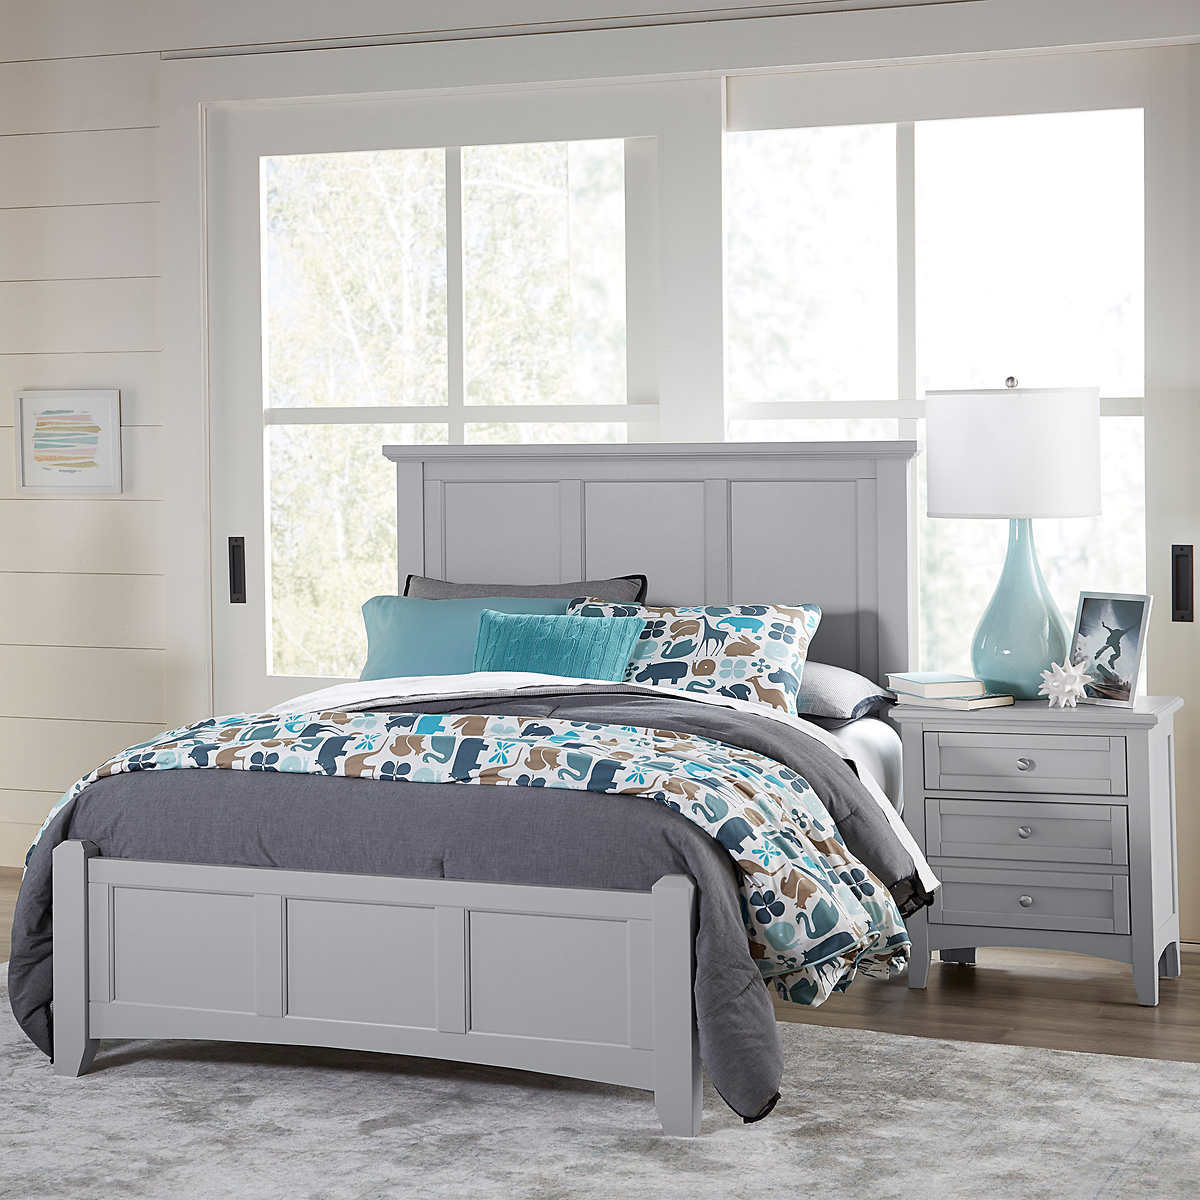 Landon Full Bed Night Stand Costco, Landon Twin Over Full Loft Bunk Bed Instructions